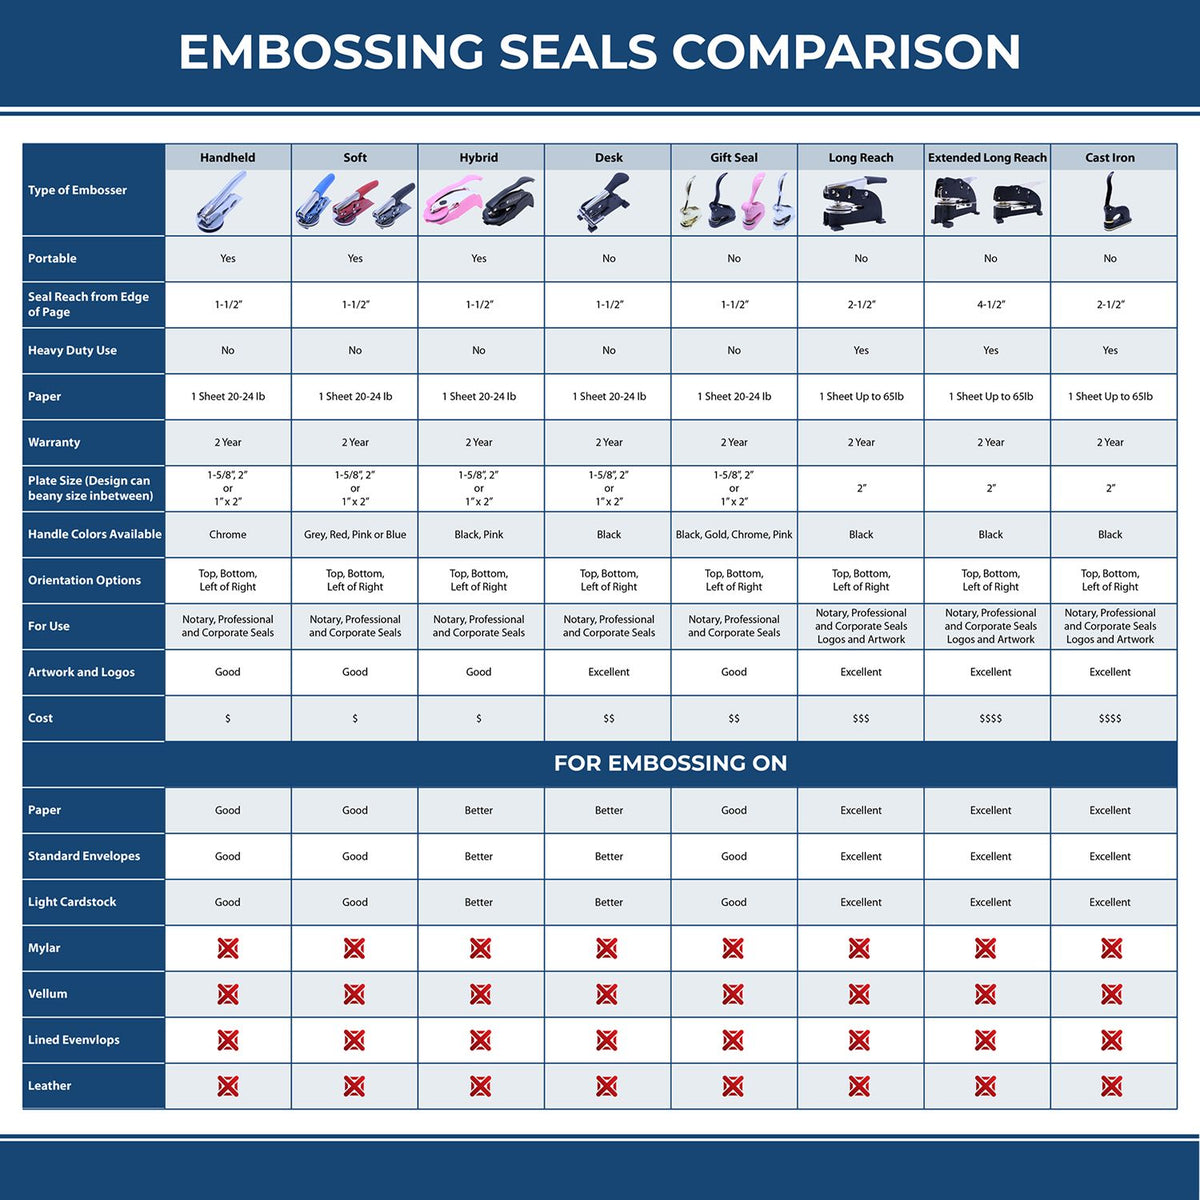 A comparison chart for the different types of mount models available for the Gift Maryland Engineer Seal